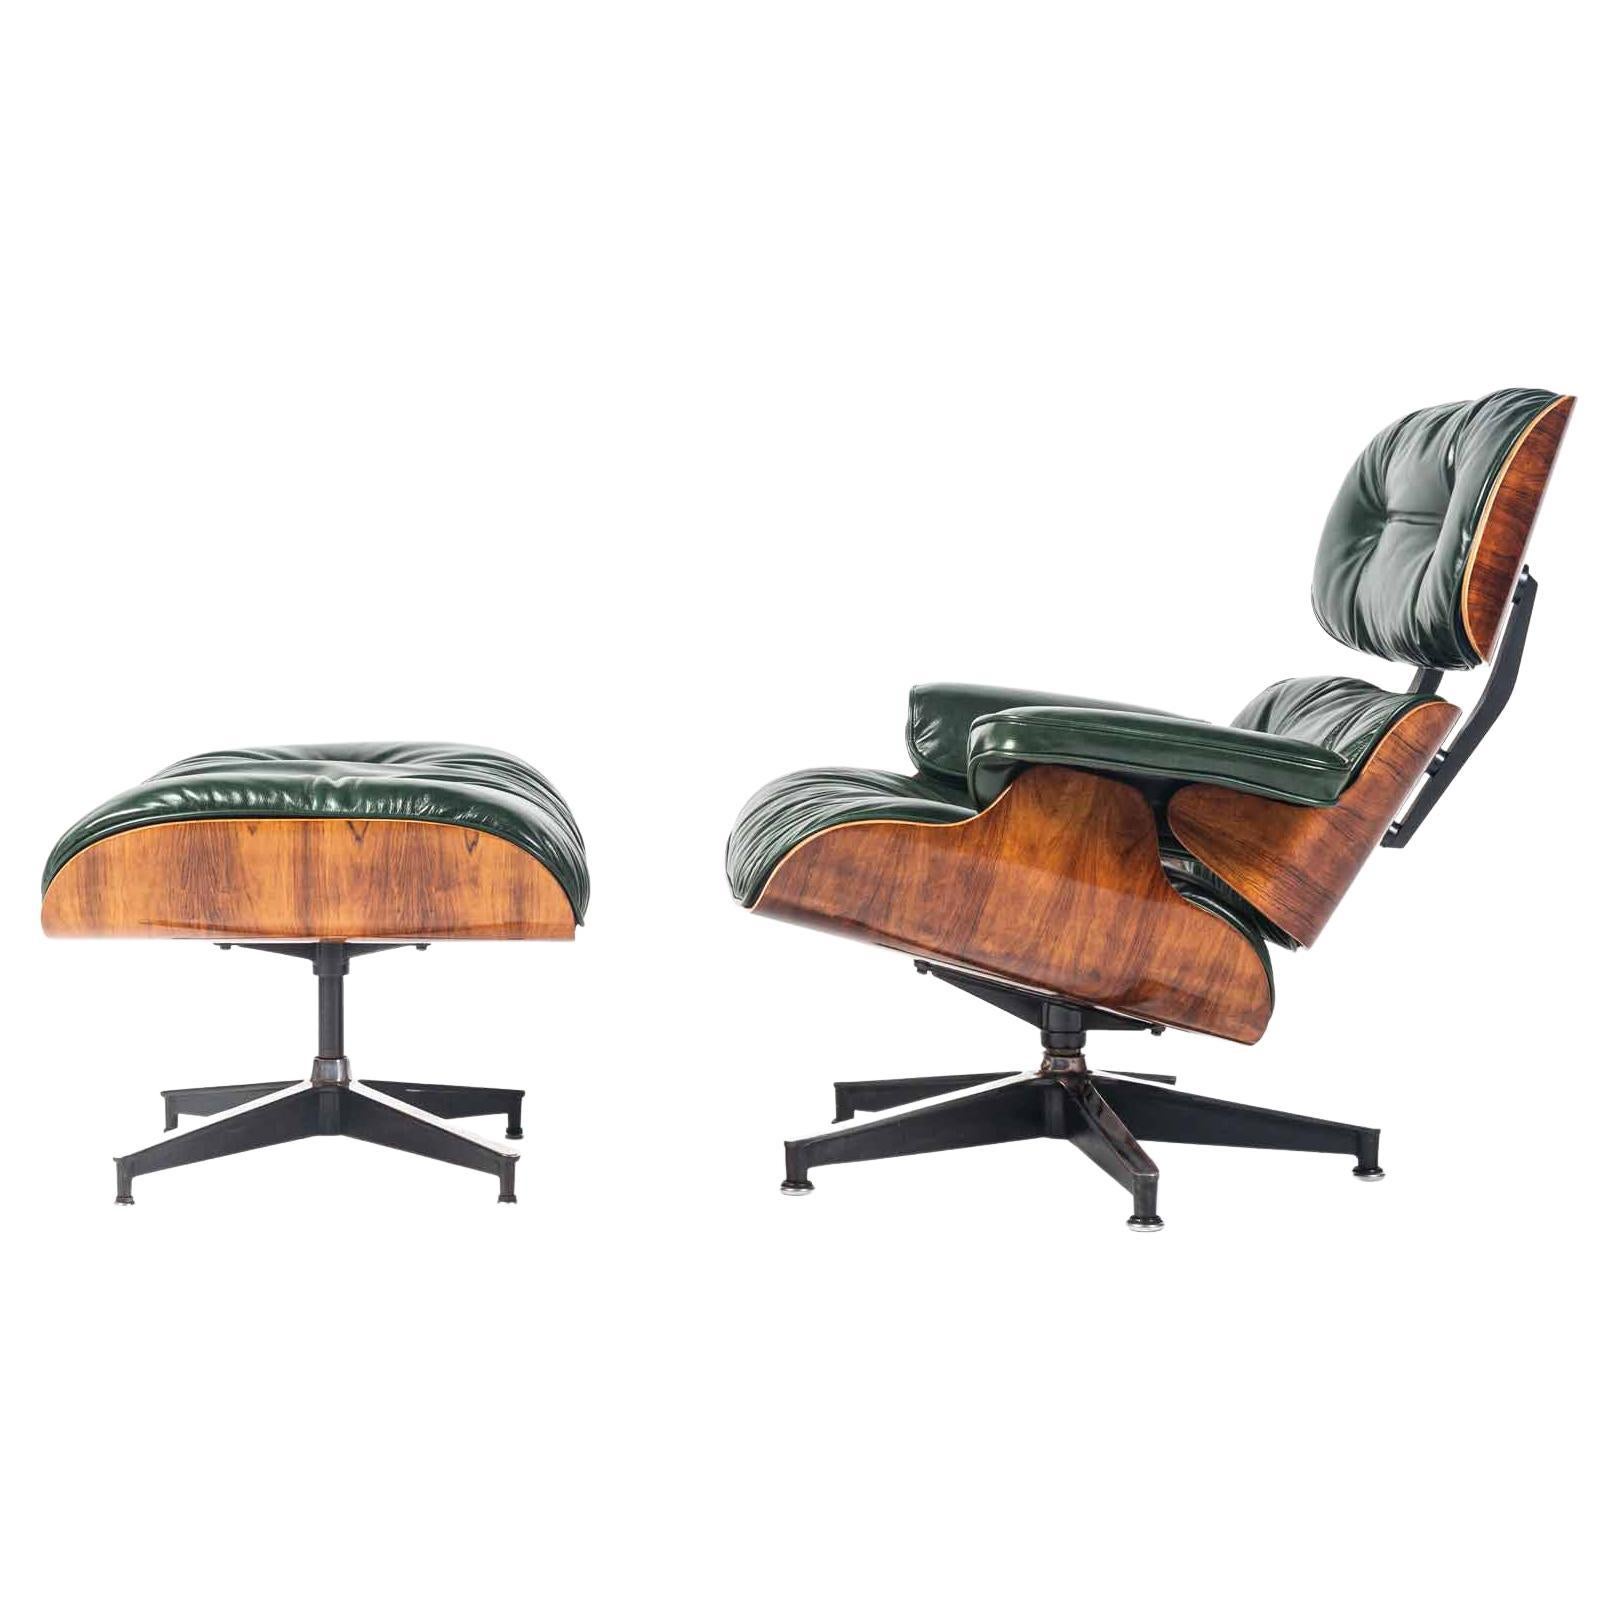 Customed Order, 3rd Gen Eames Lounge Chair in British Racing Green Leather